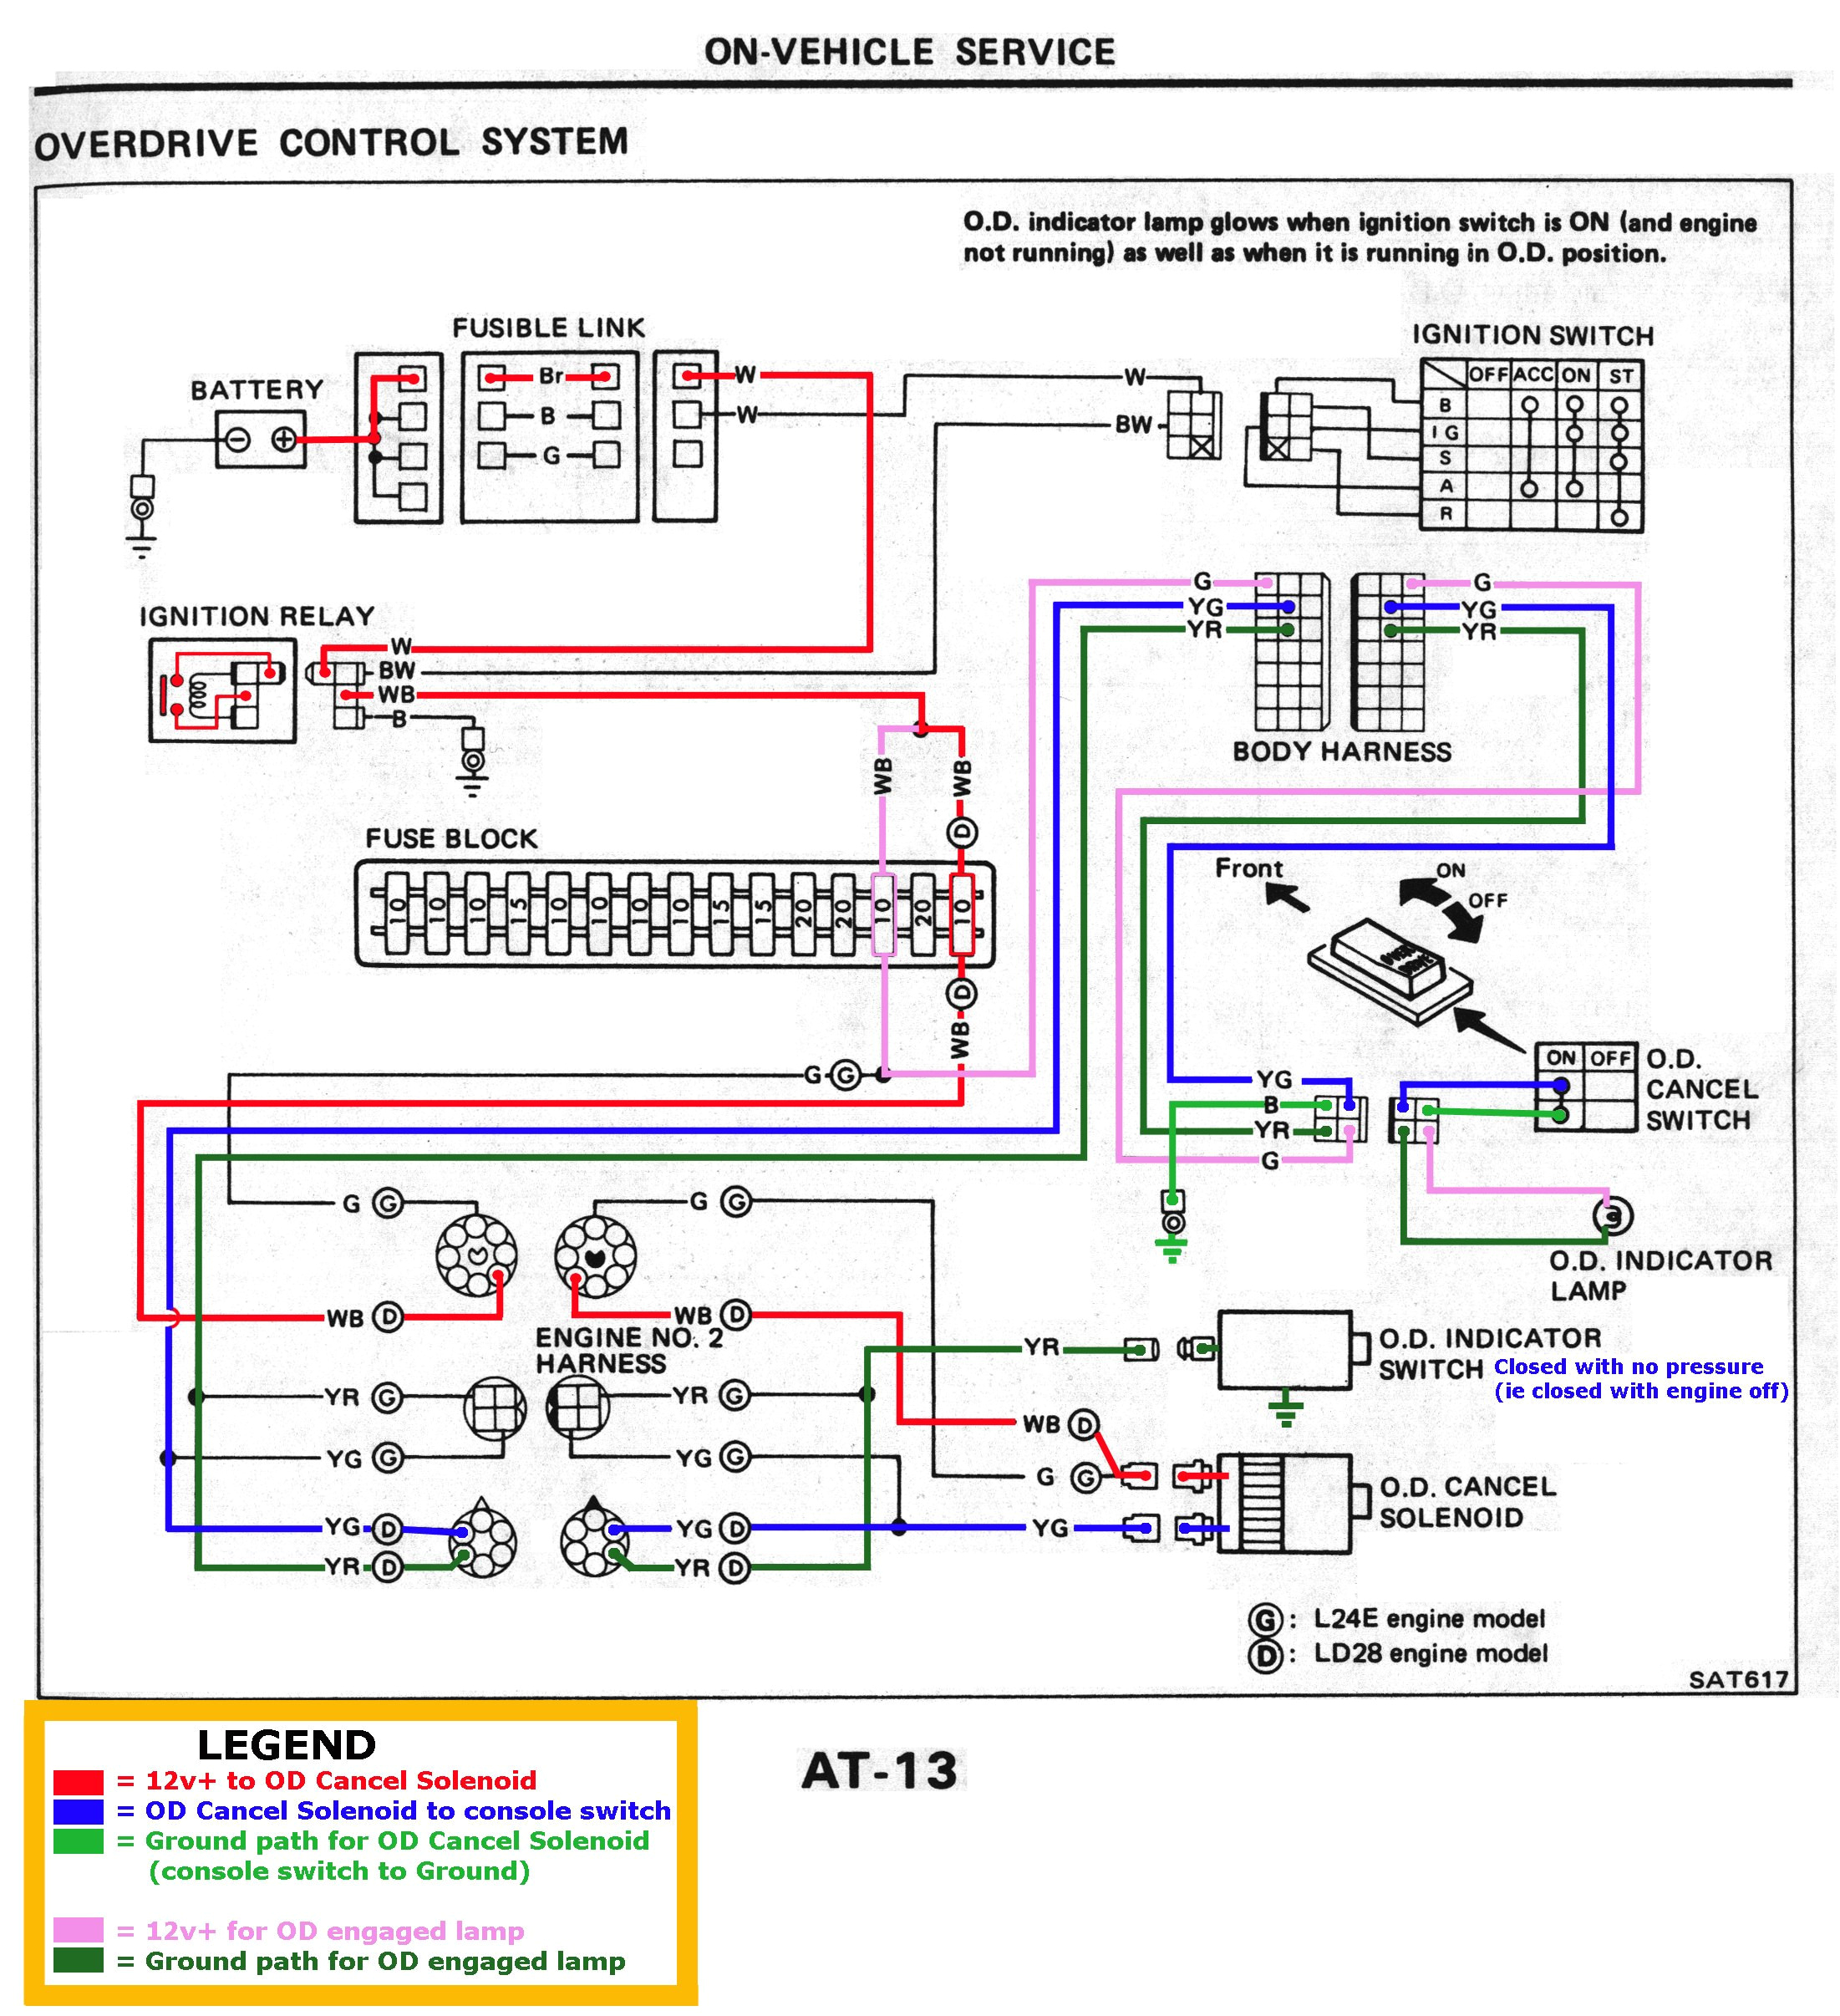 wiring diagram codes wiring diagram show wiring diagram color codes likewise switch and outlet bo wiring on